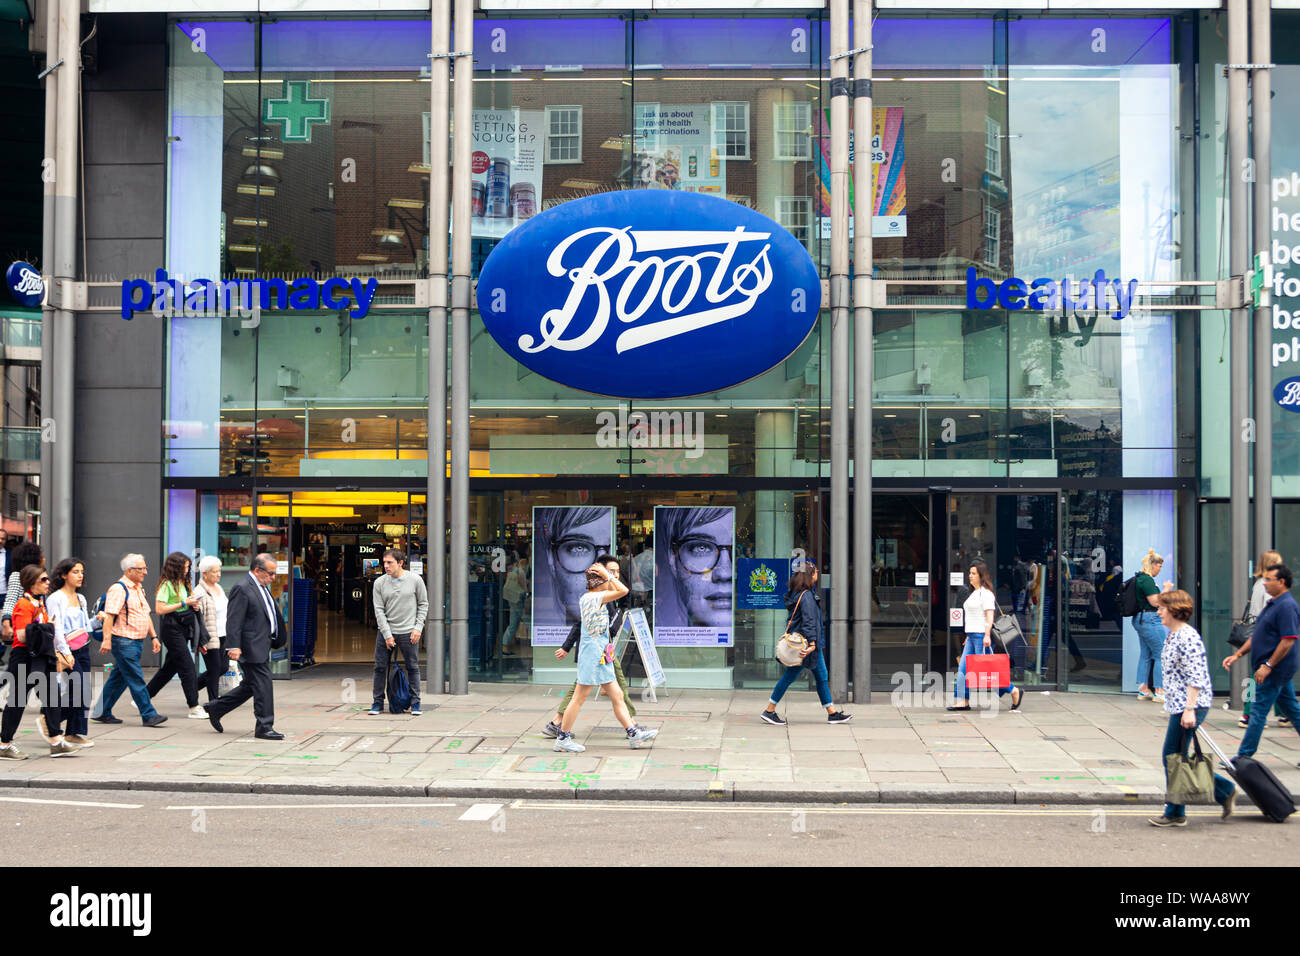 London, UK - July 18, 2019: People walking in front of the Boots pharmacy  on Oxford Street, London. Oxford Street is one of the most famous shopping  s Stock Photo - Alamy